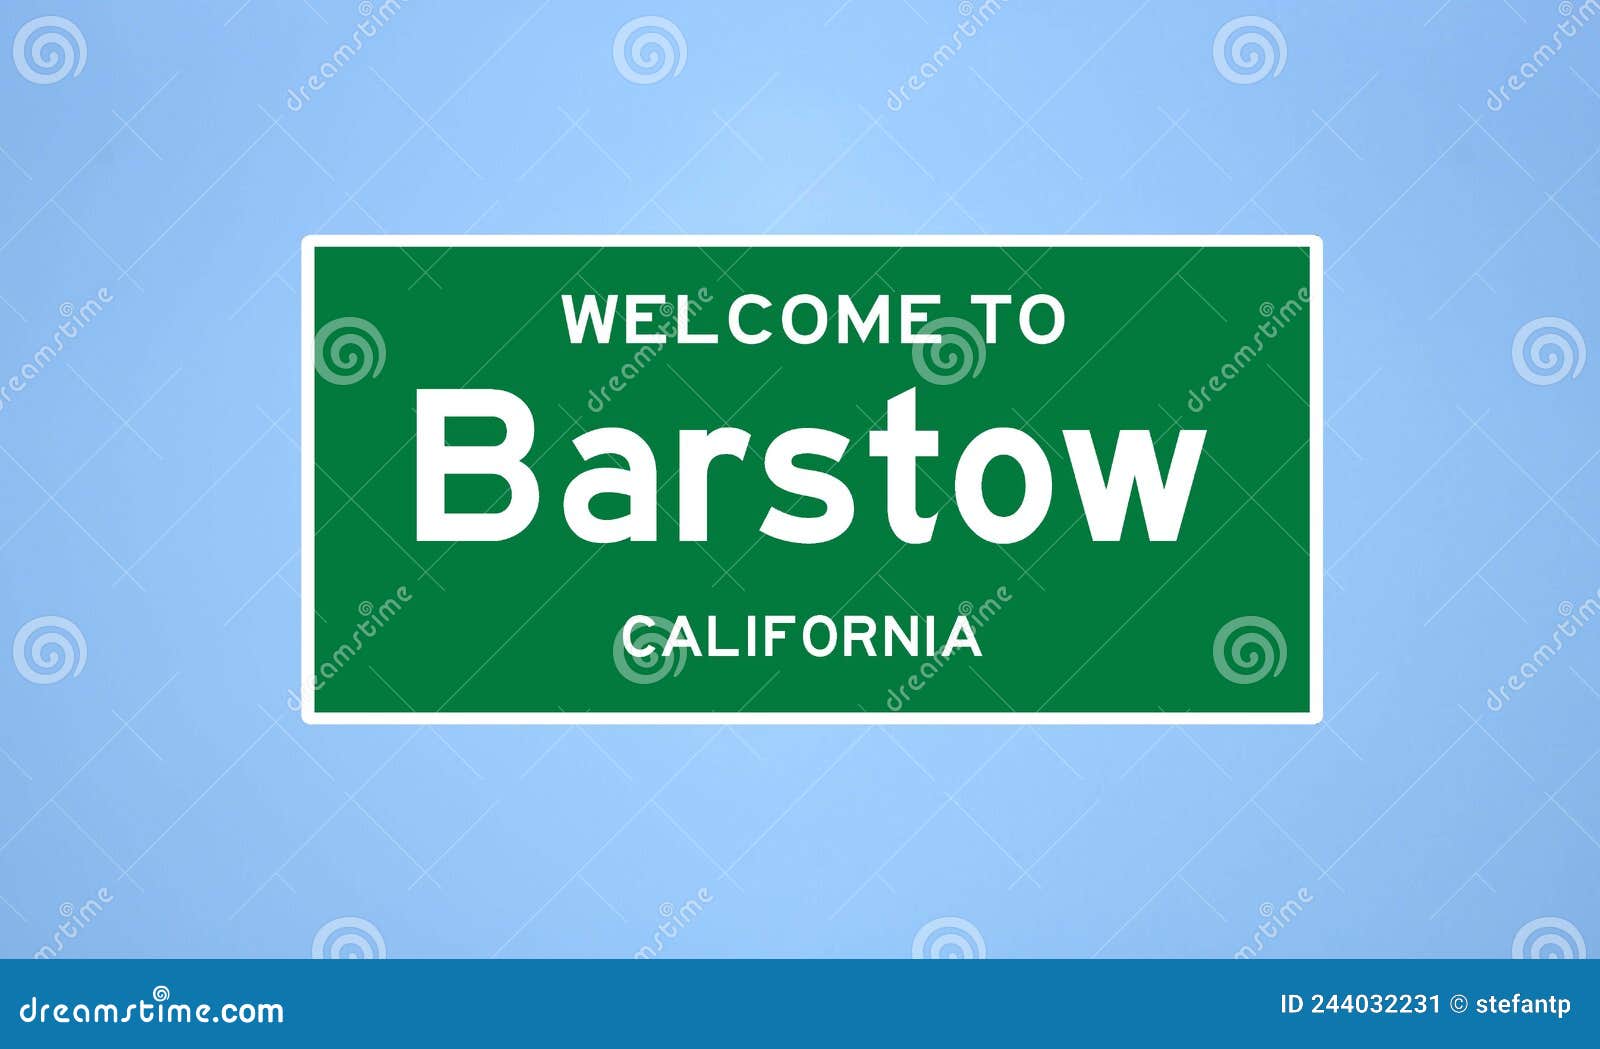 barstow, california city limit sign. town sign from the usa.